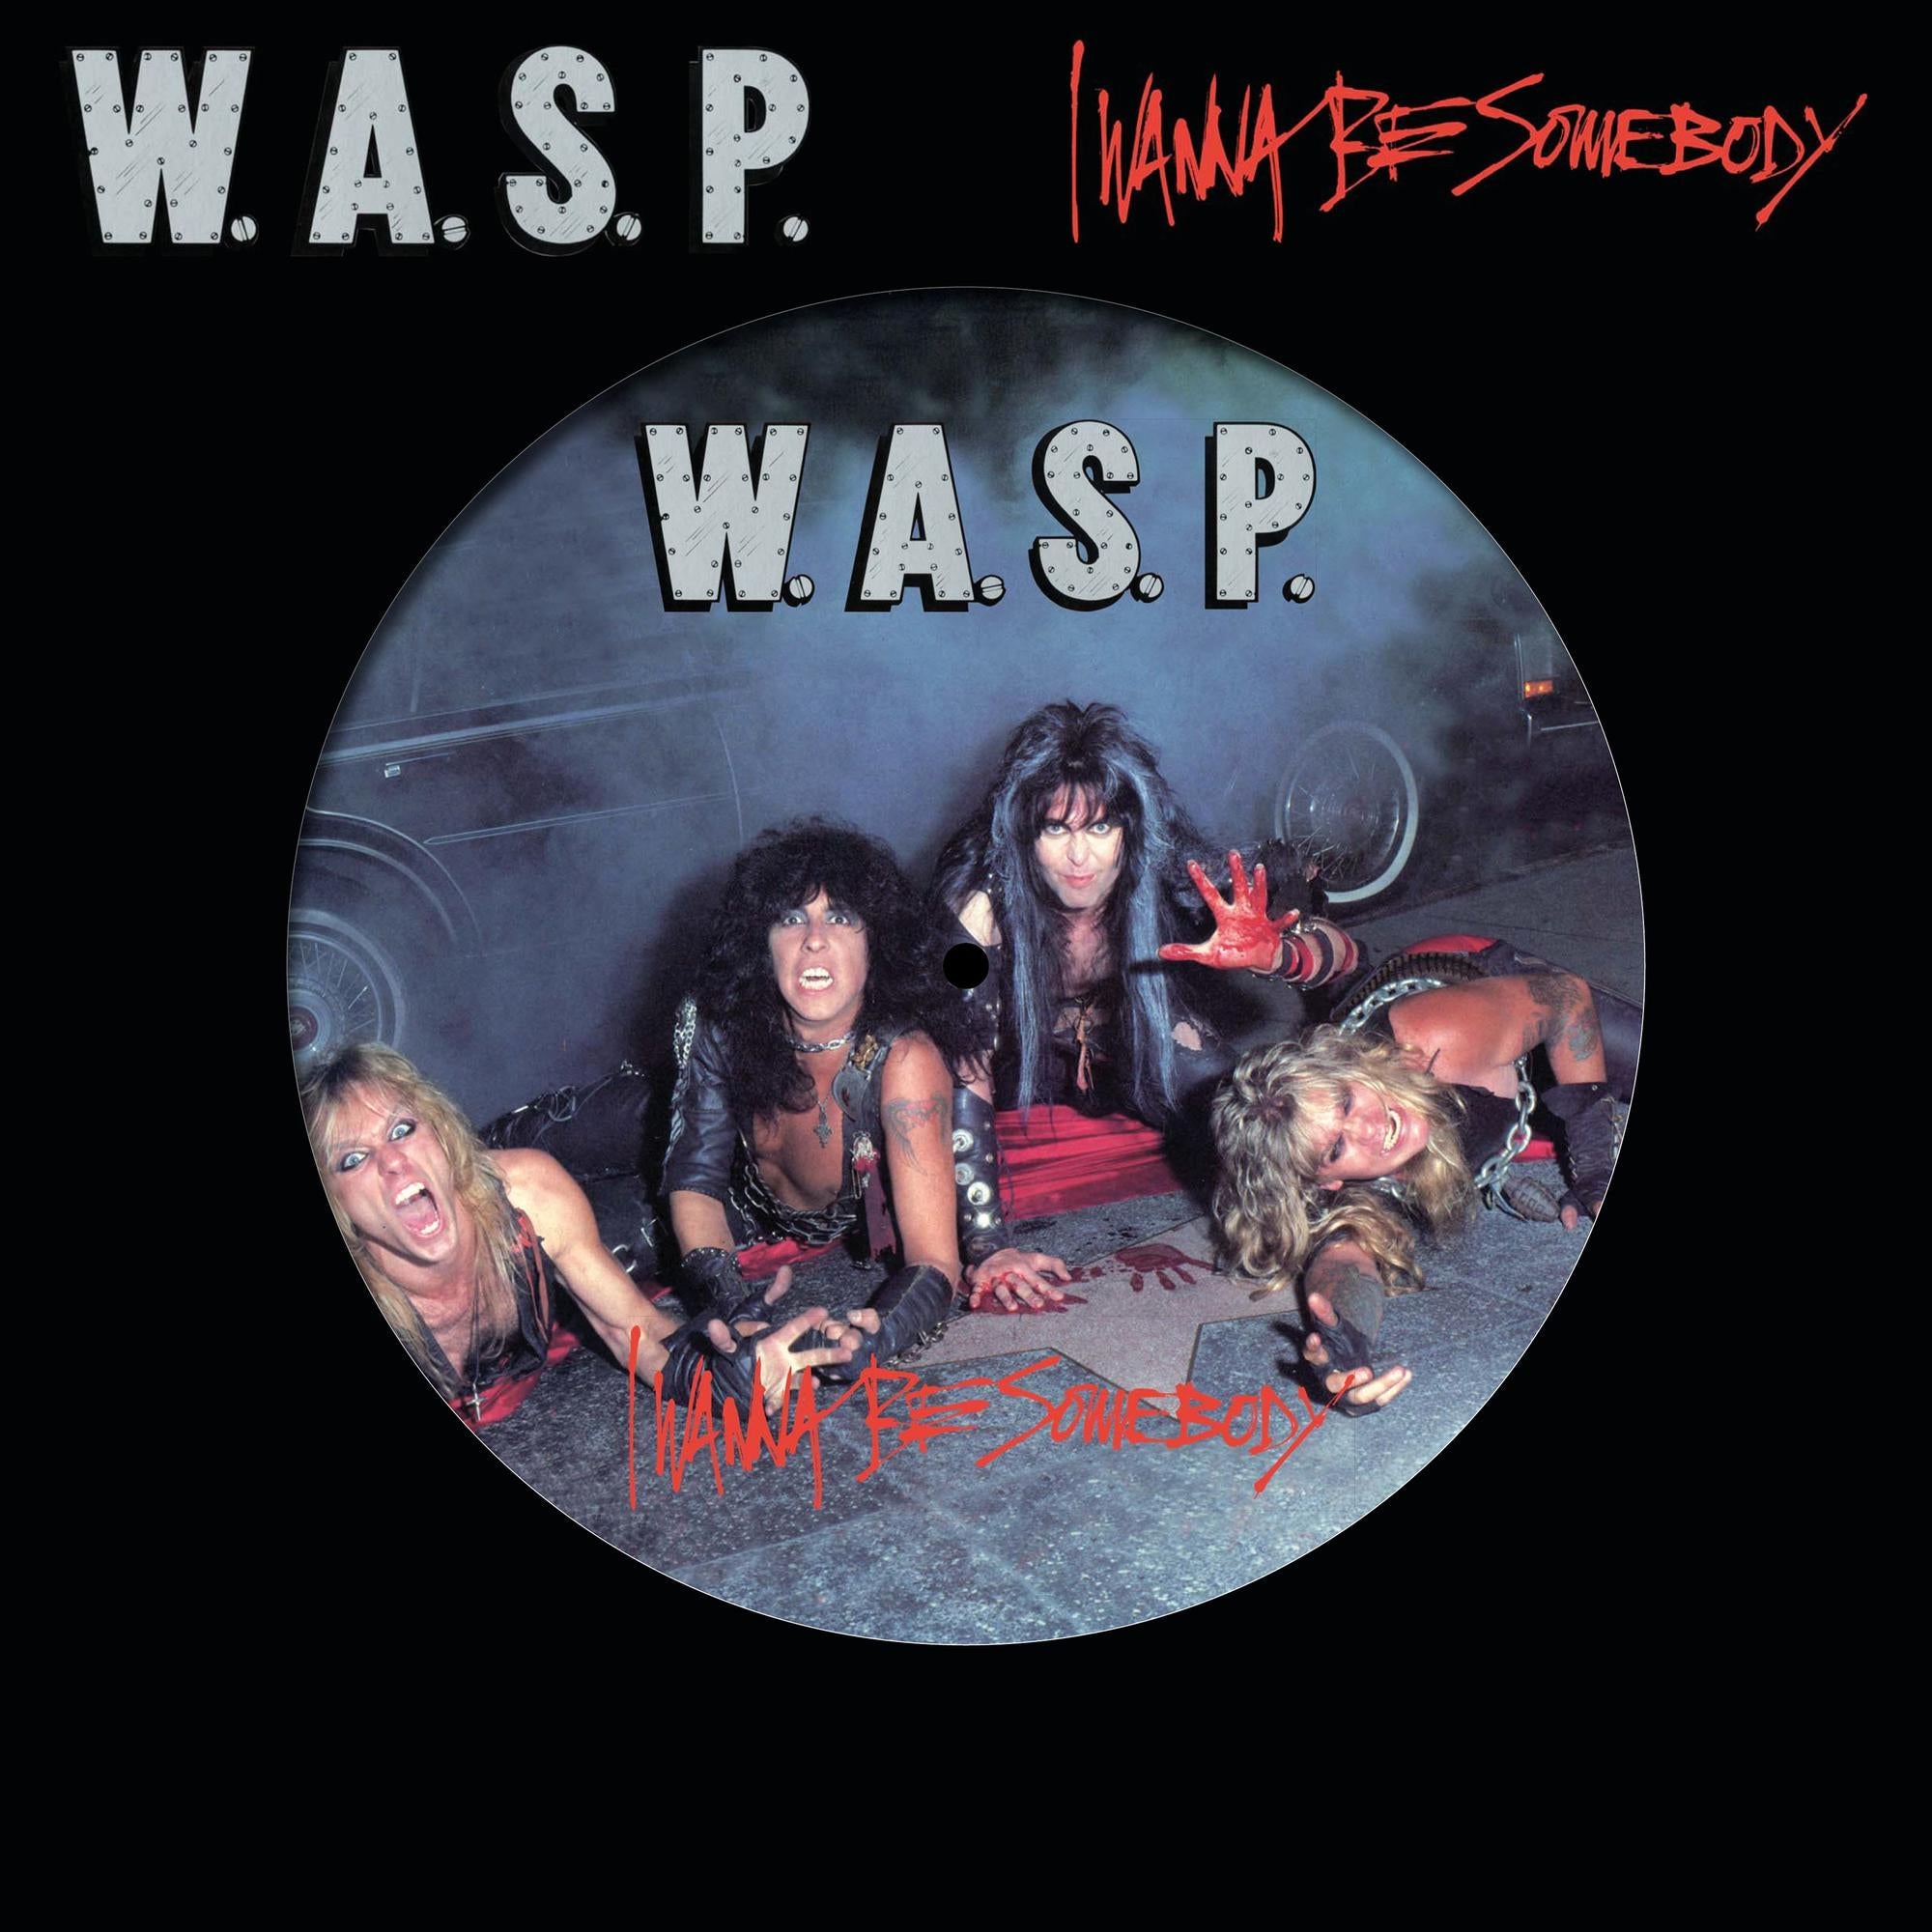 W.A.S.P. 'I WANNA BE SOMEBODY' LP (Picture Disc)